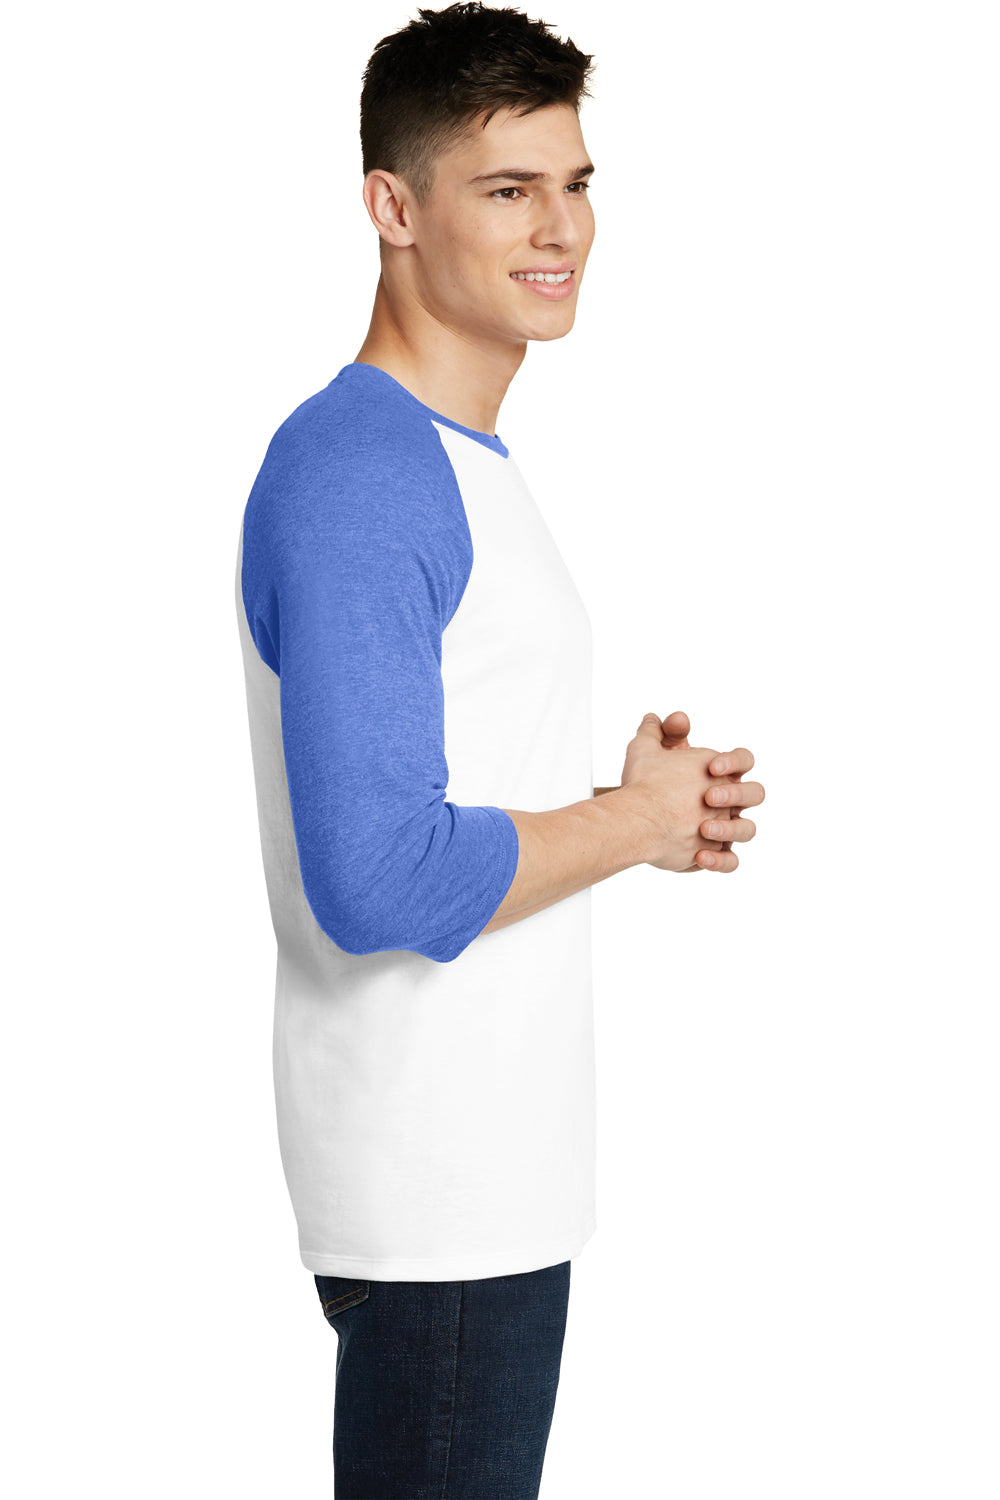 District DT6210 Mens Very Important 3/4 Sleeve Crewneck T-Shirt White/Heather Royal Blue Side